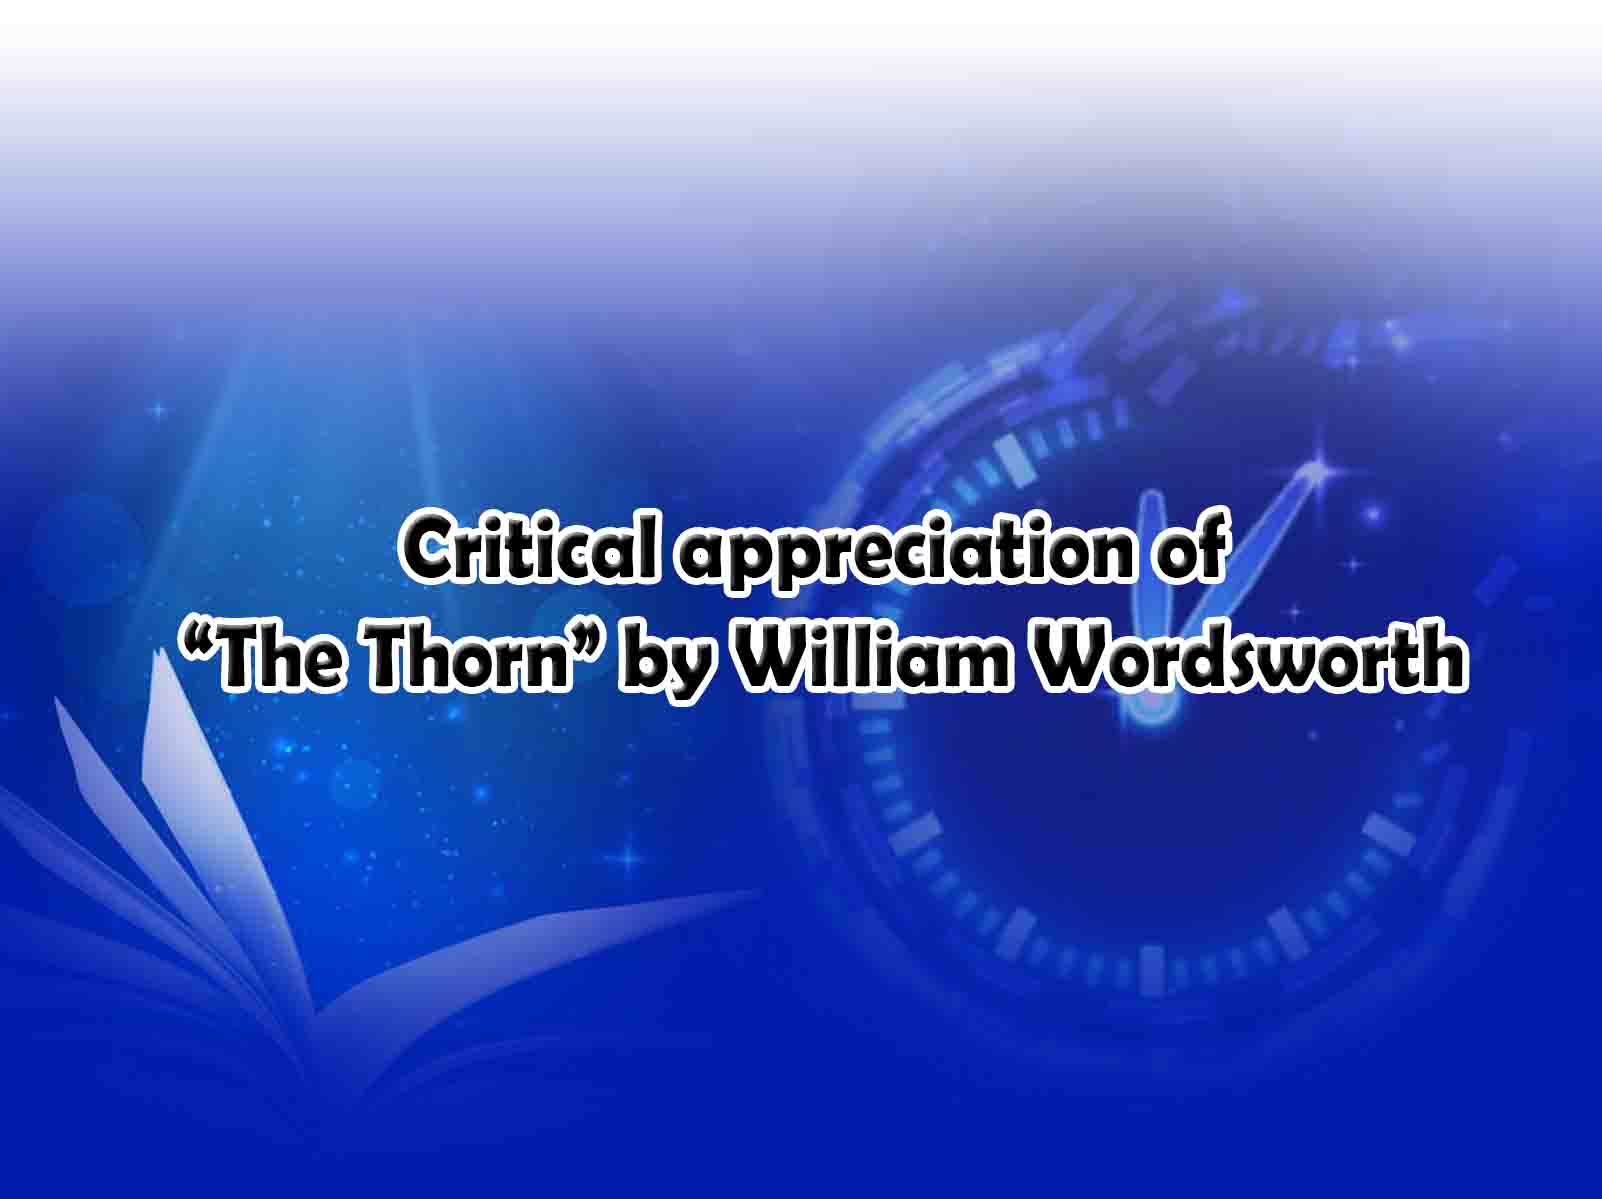 Critical appreciation of “The Thorn” by William Wordsworth